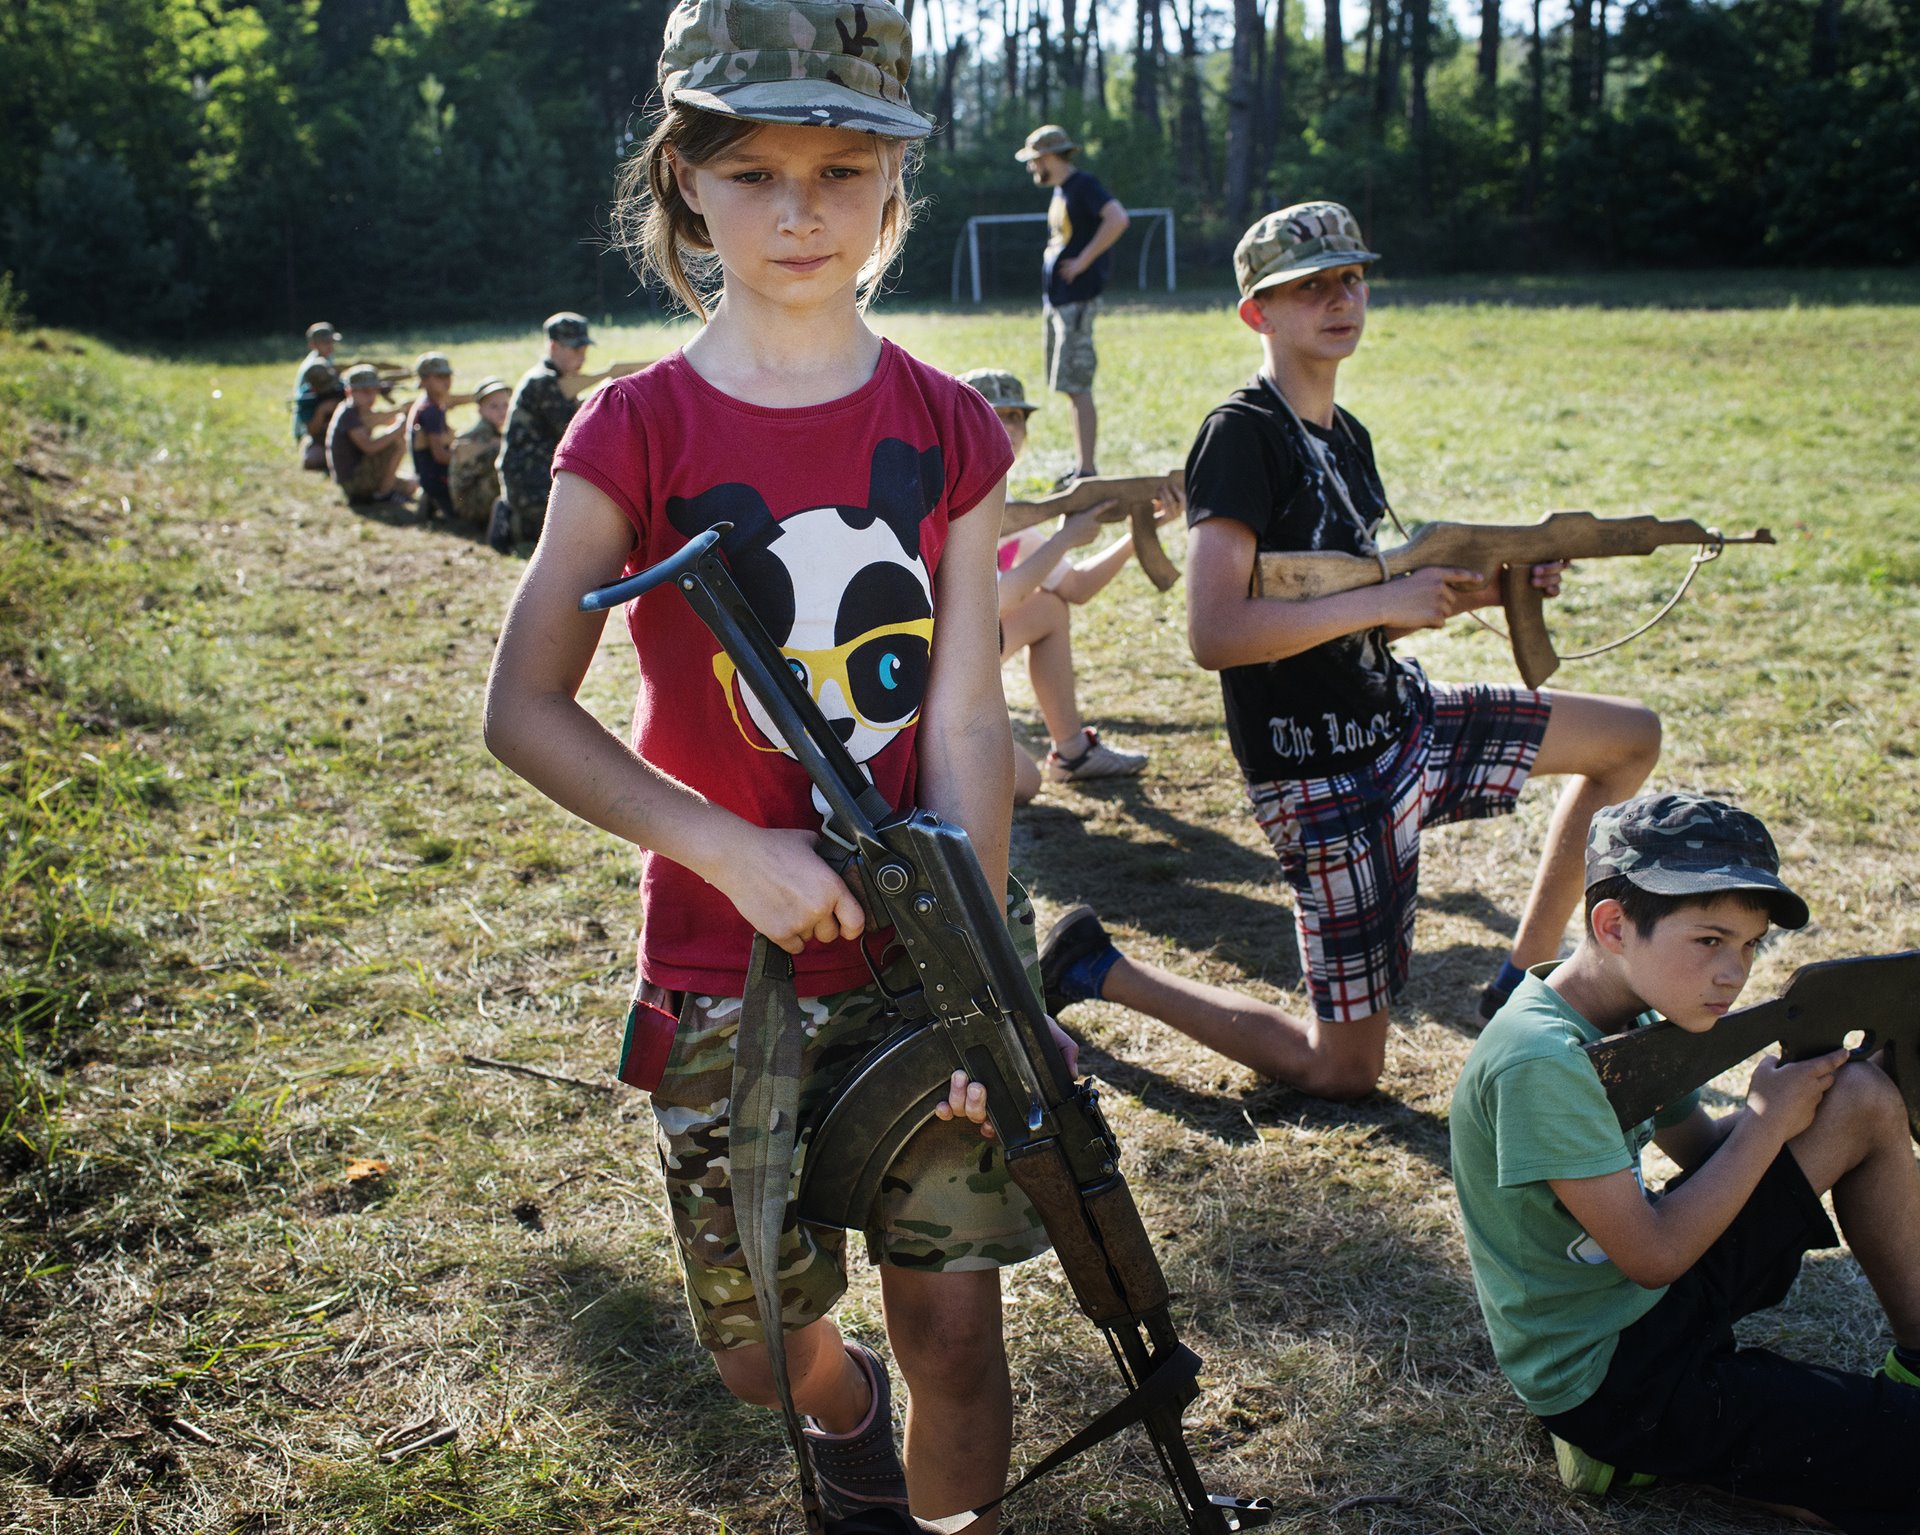 Children undergo military training at a summer camp for children aged from 7 to 18, in suburban Kyiv, Ukraine. The camp is one of a number organized by the Azov Battalion, a radical nationalist militia, now part of the National Guard, that leads the fight against pro-Russian separatists in eastern Ukraine.